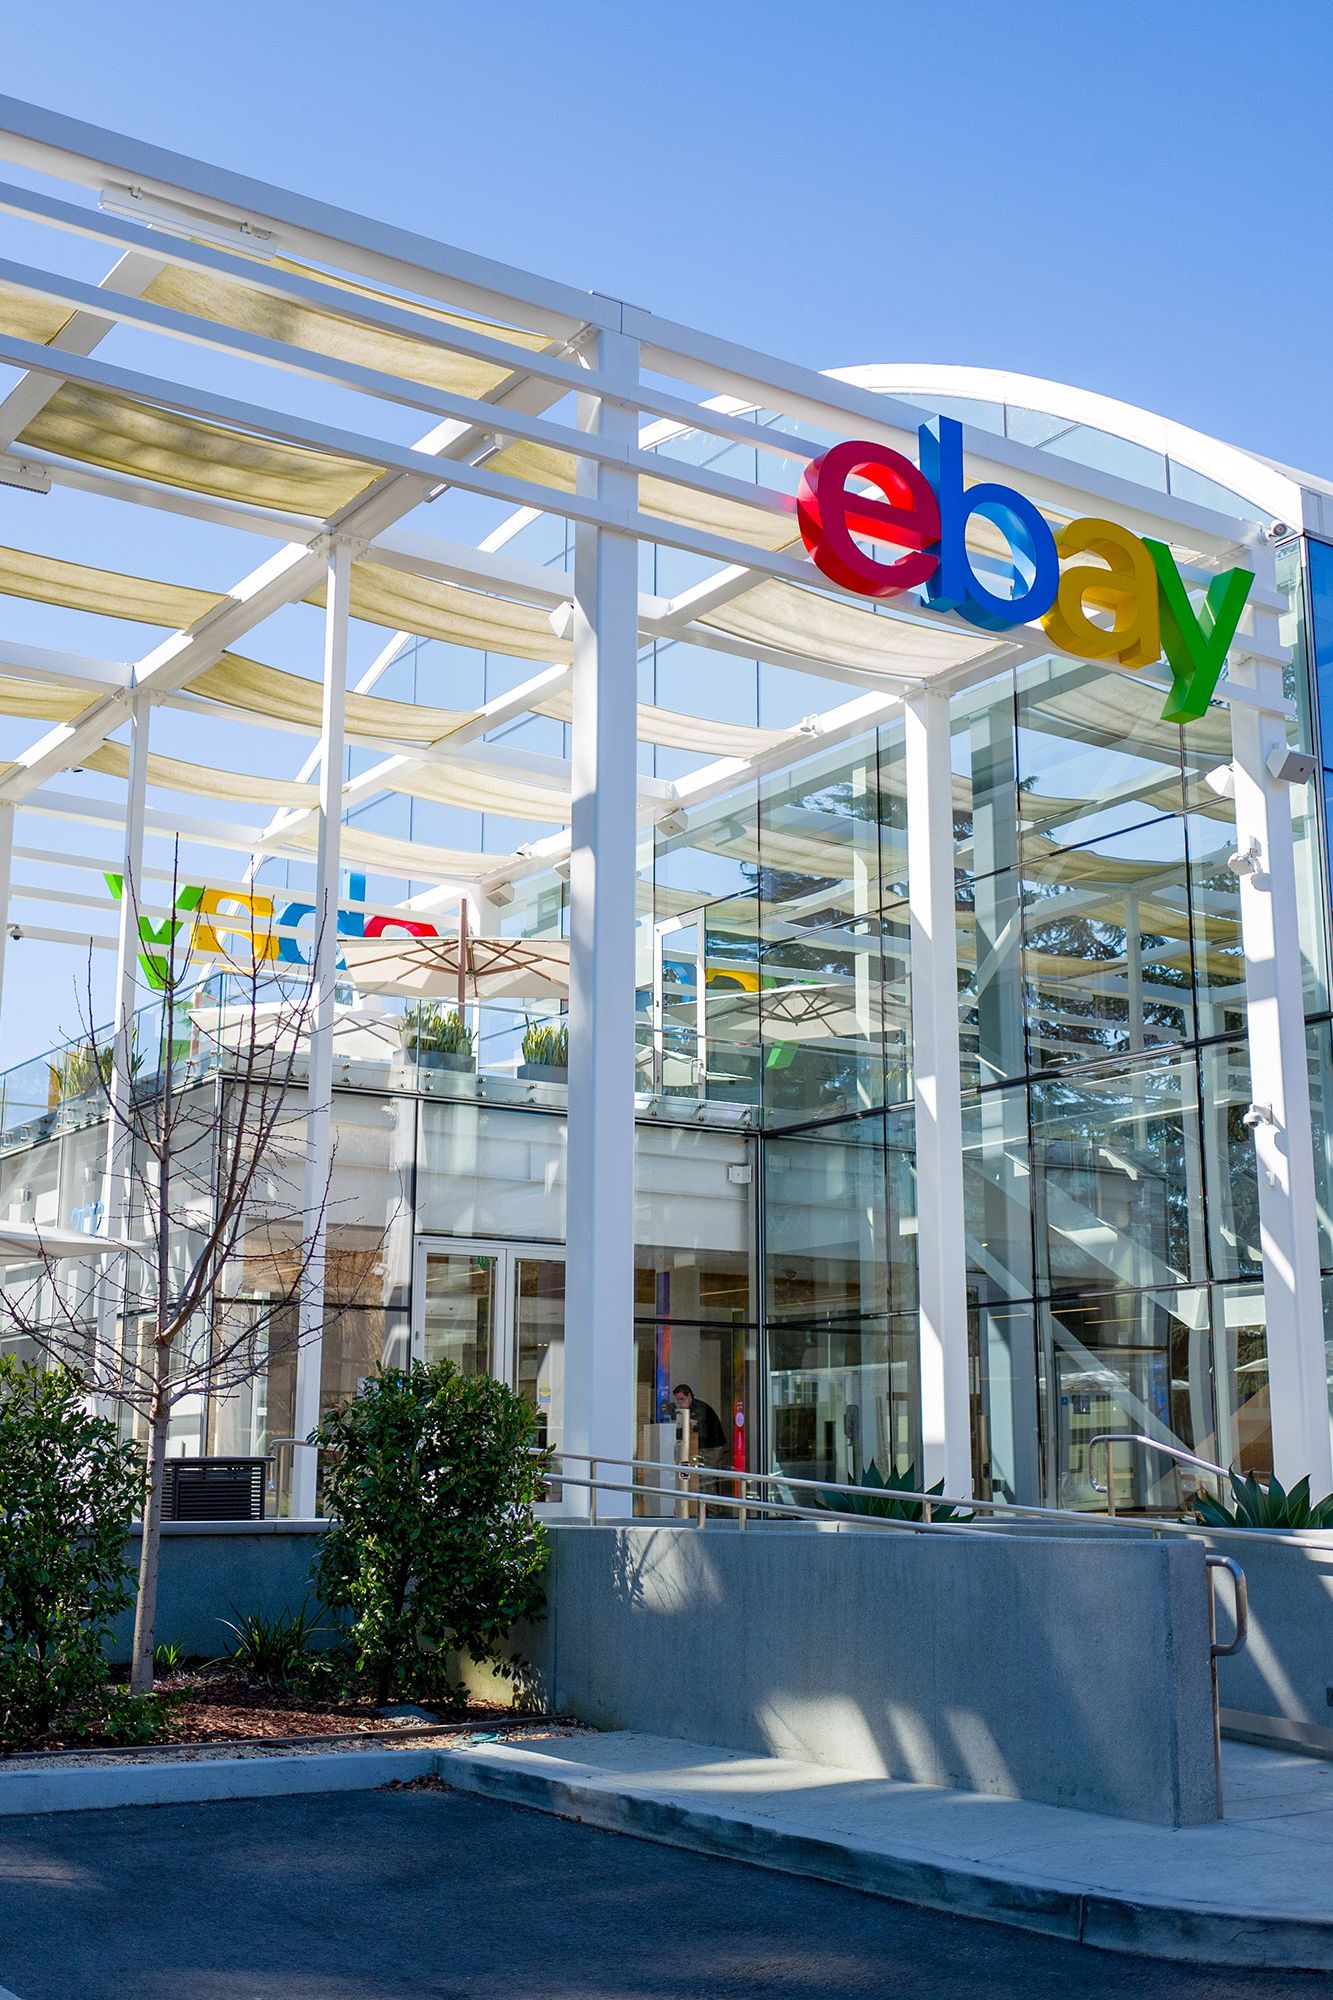 EBay sent cockroaches, porn and a bloody pig mask to bloggers | CNN Business